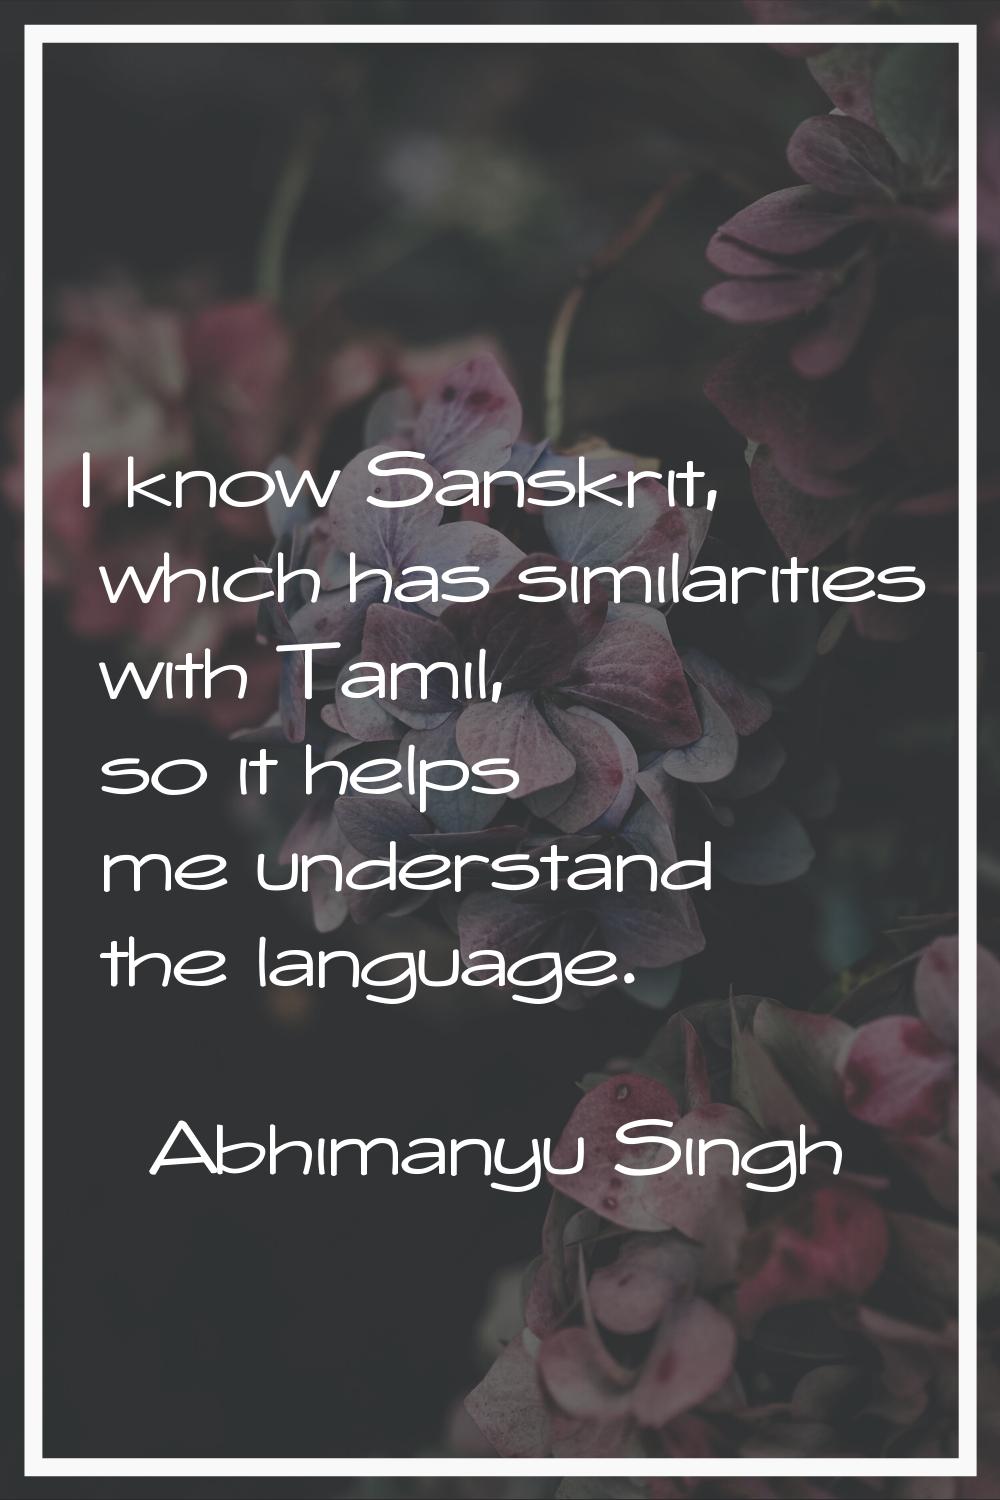 I know Sanskrit, which has similarities with Tamil, so it helps me understand the language.